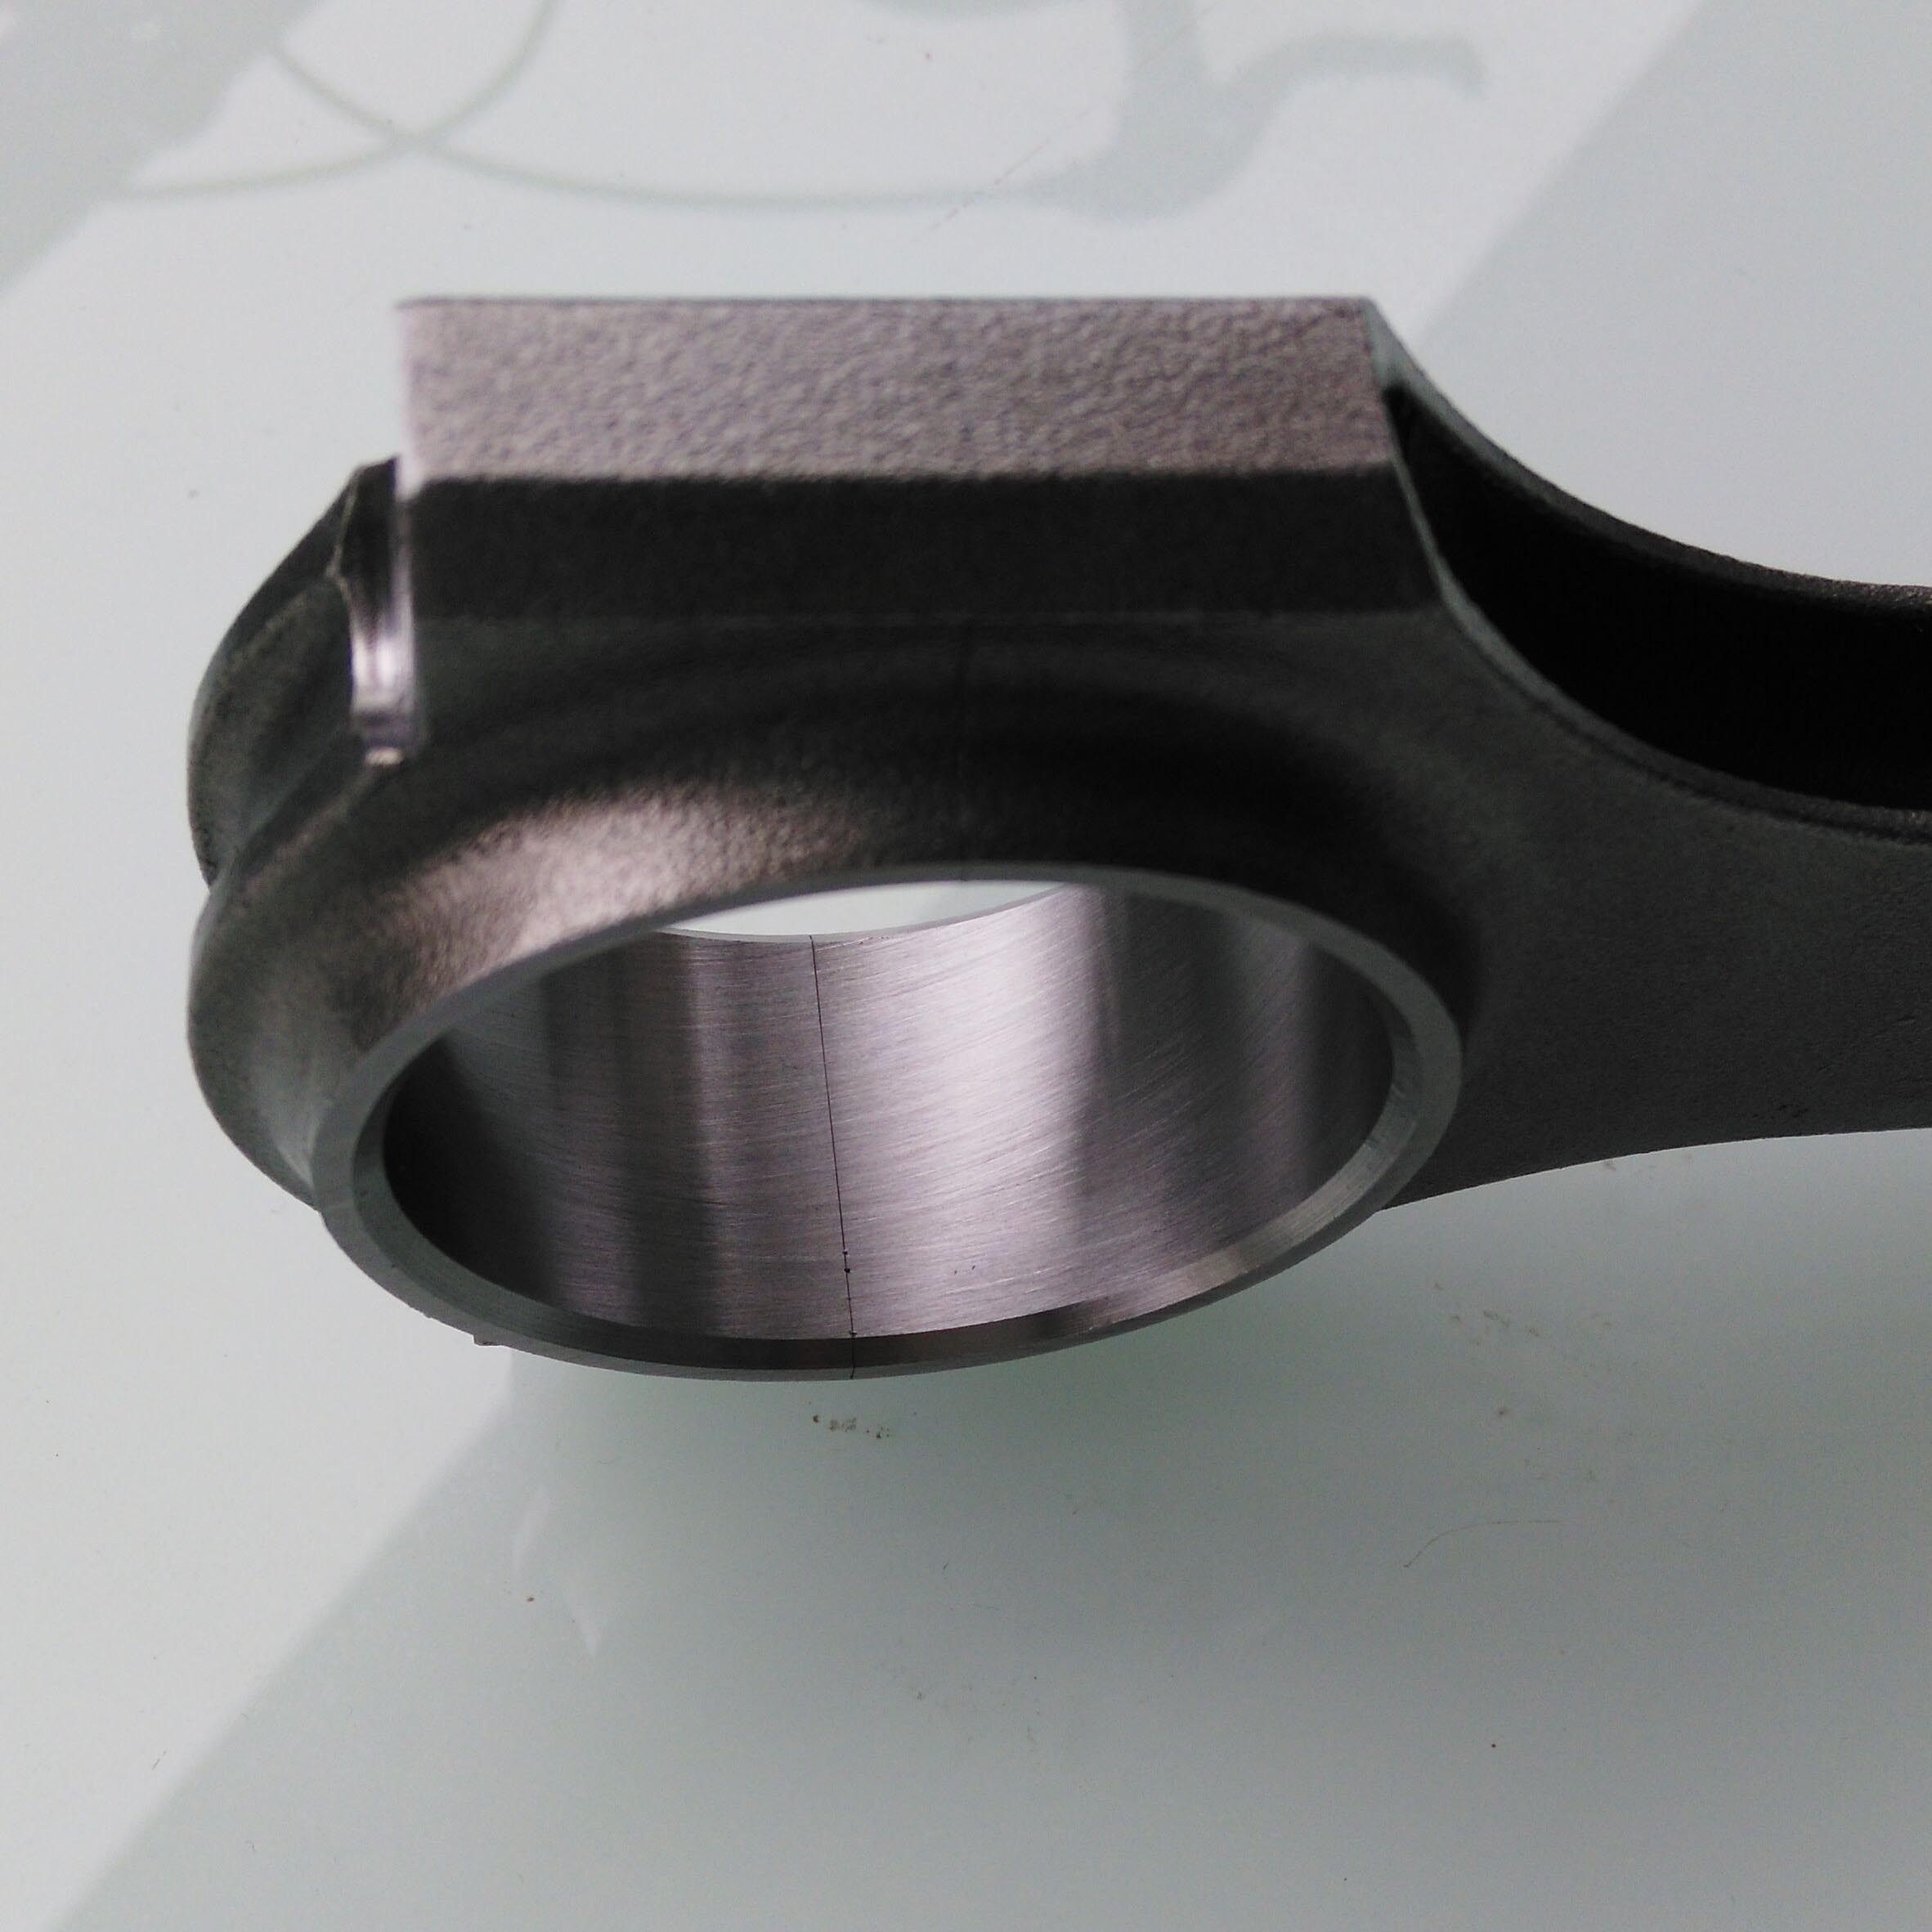 2.3L 16V racing connecting rod for Benz 